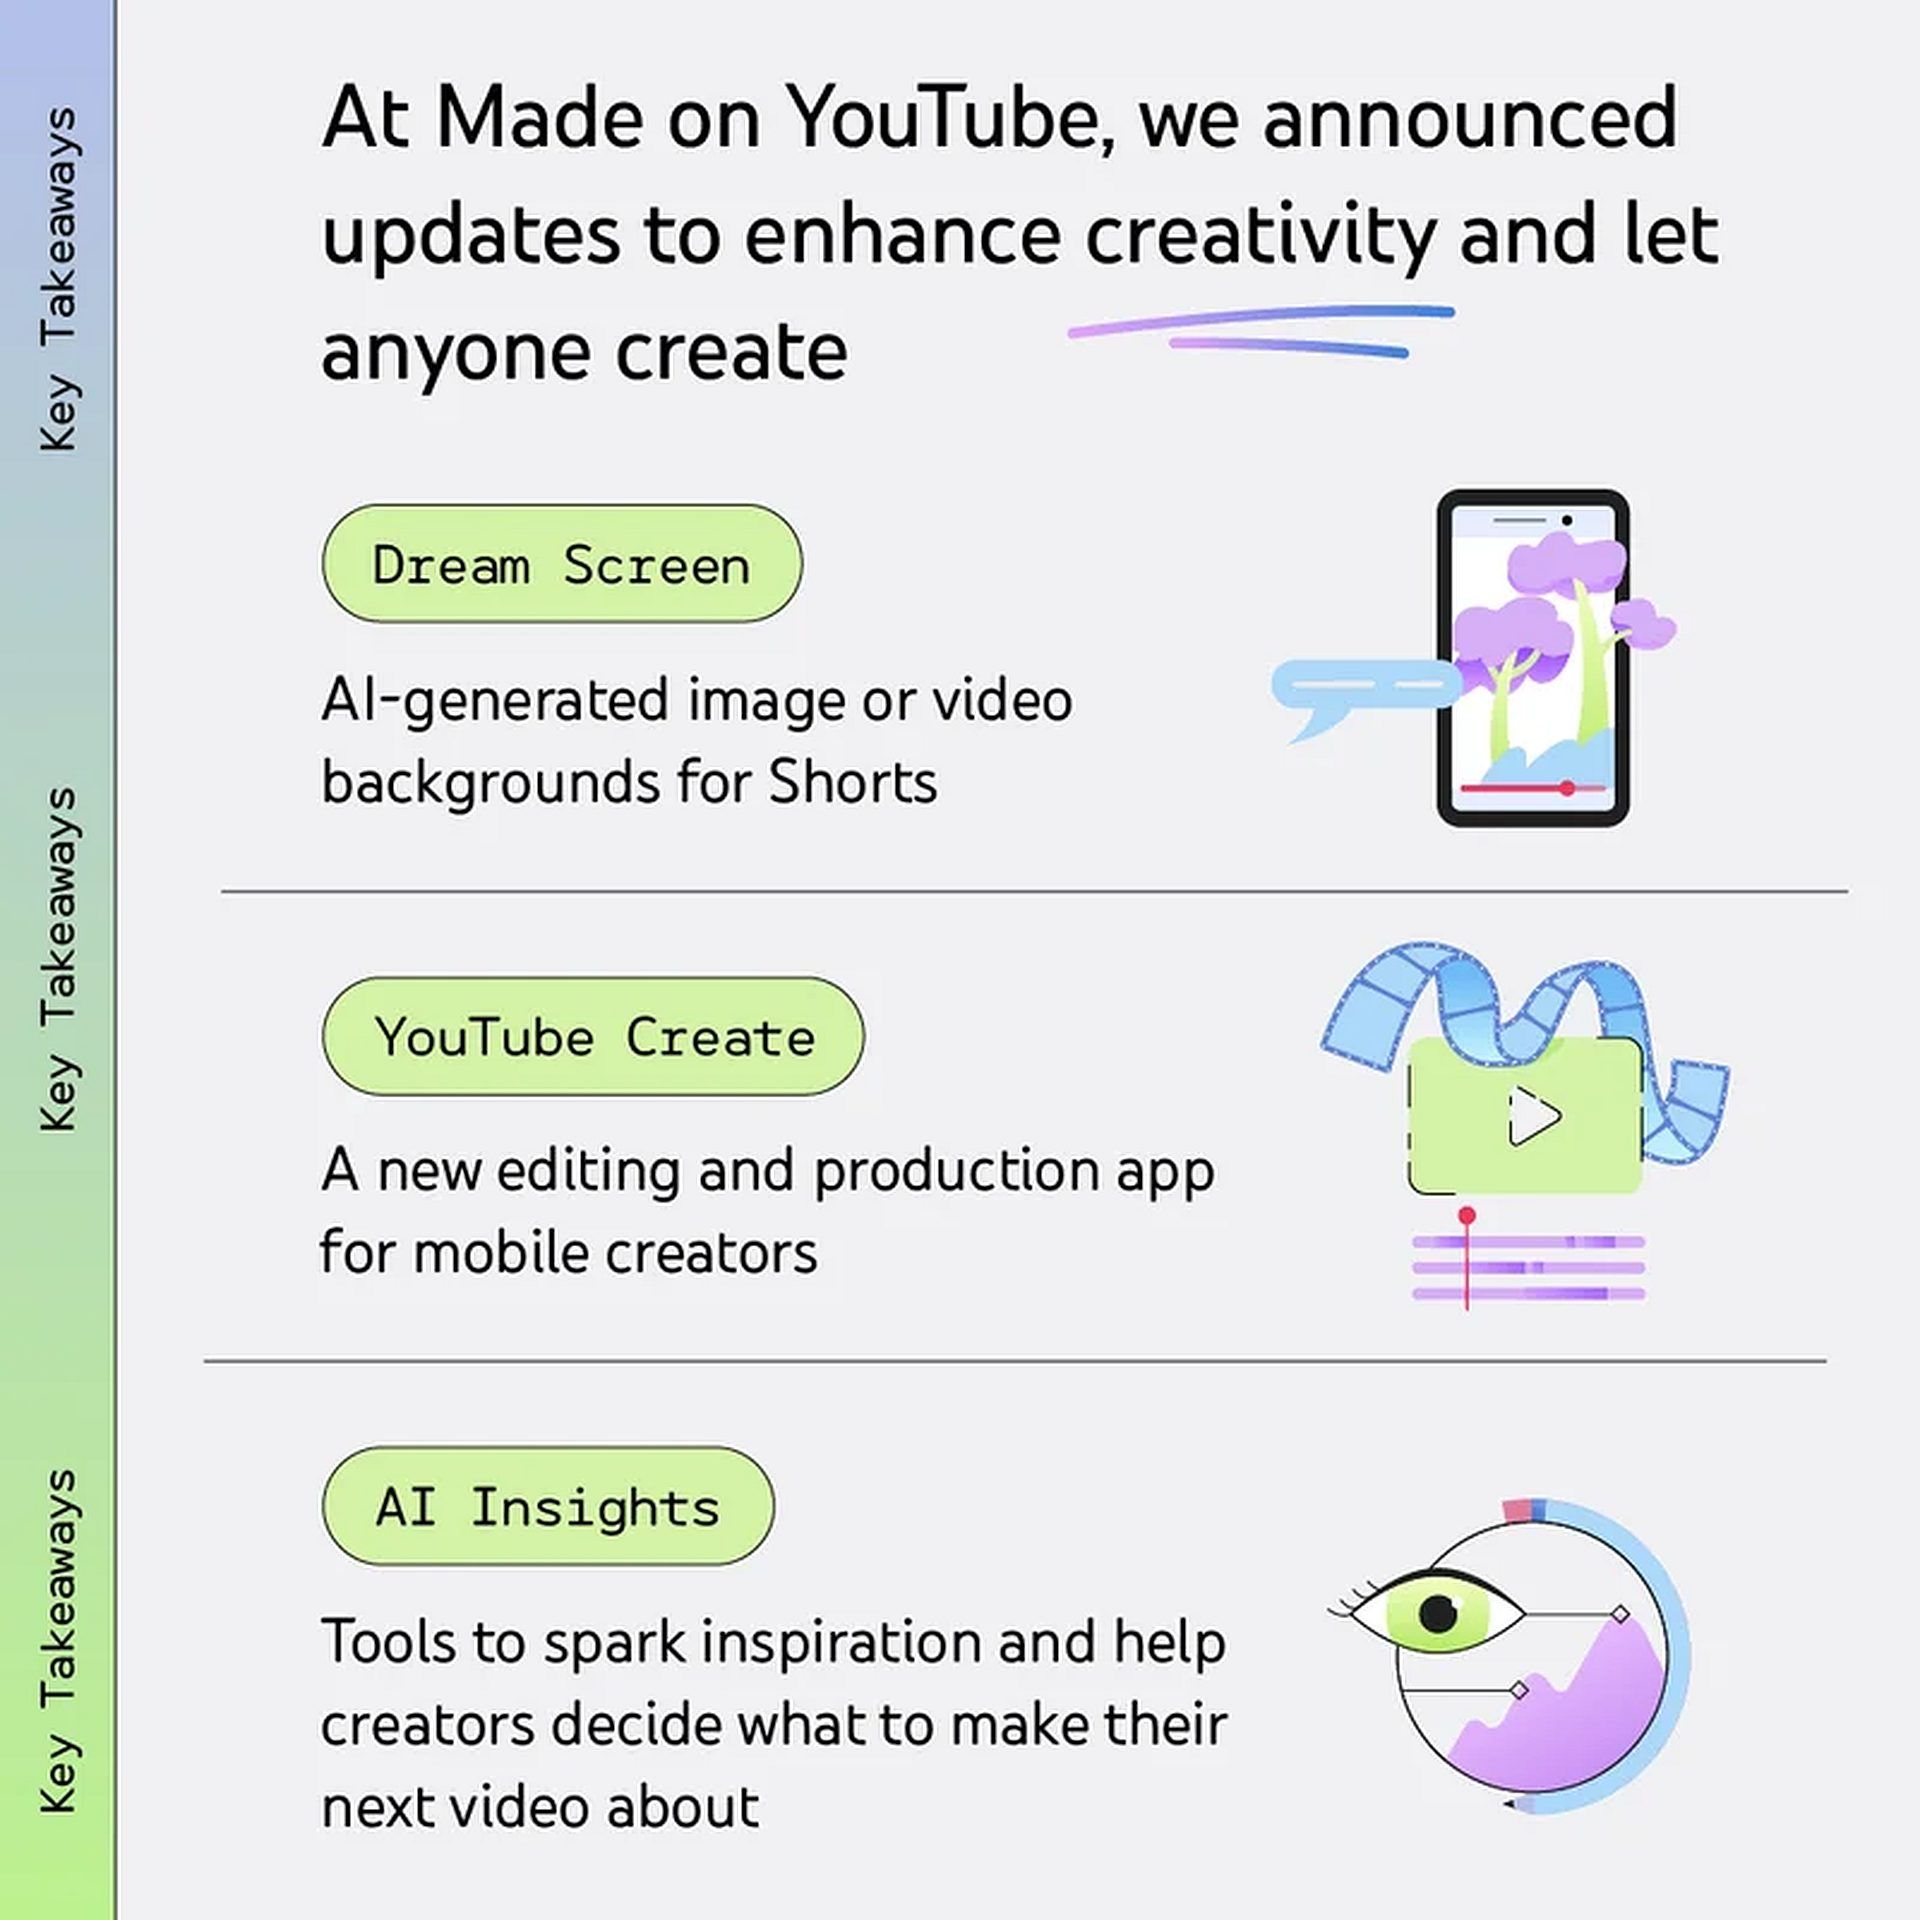 Explore YouTube AI revolution: Dream Screen, content suggestions, and more! Discover the future of content creation on the platform.